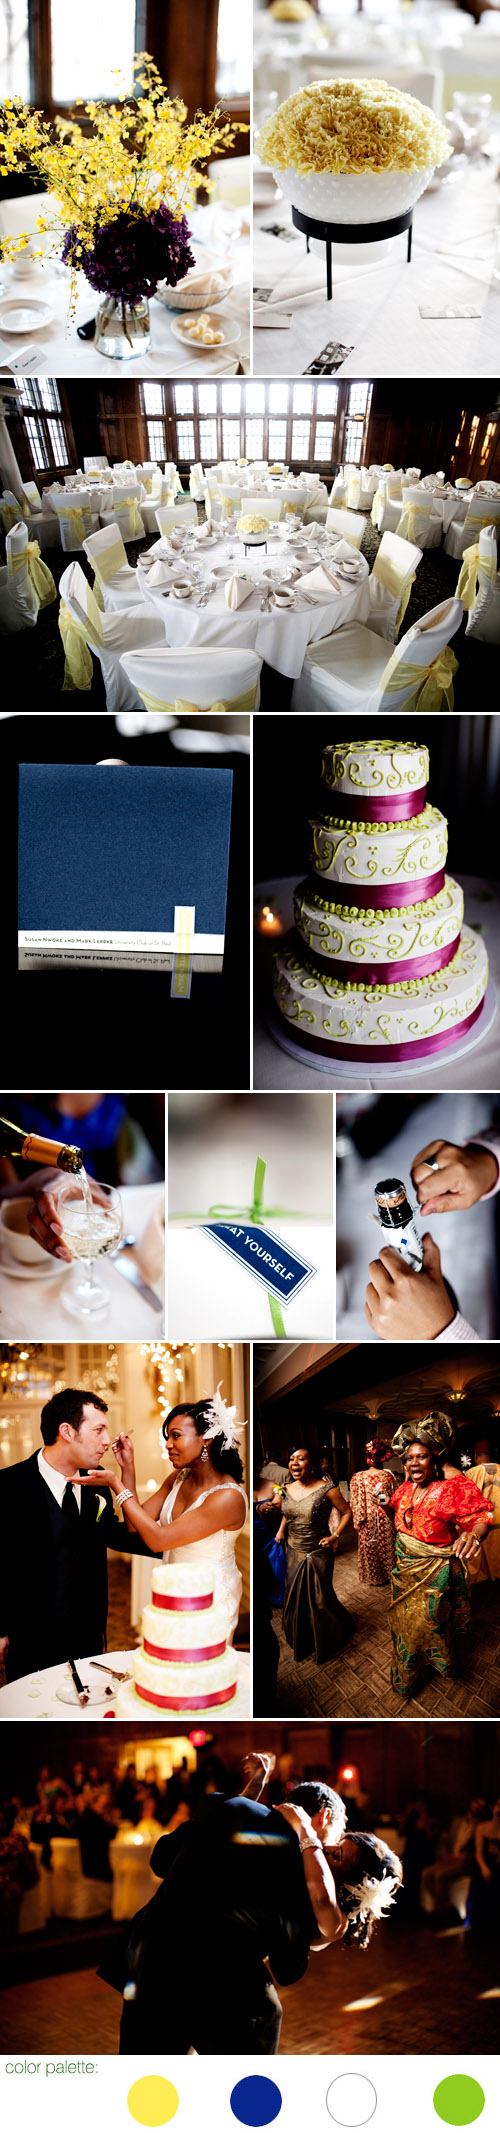 St Paul, Minnesota spring real wedding reception, yellow and blue color palette, images by Eliesa Johnson of Photogen